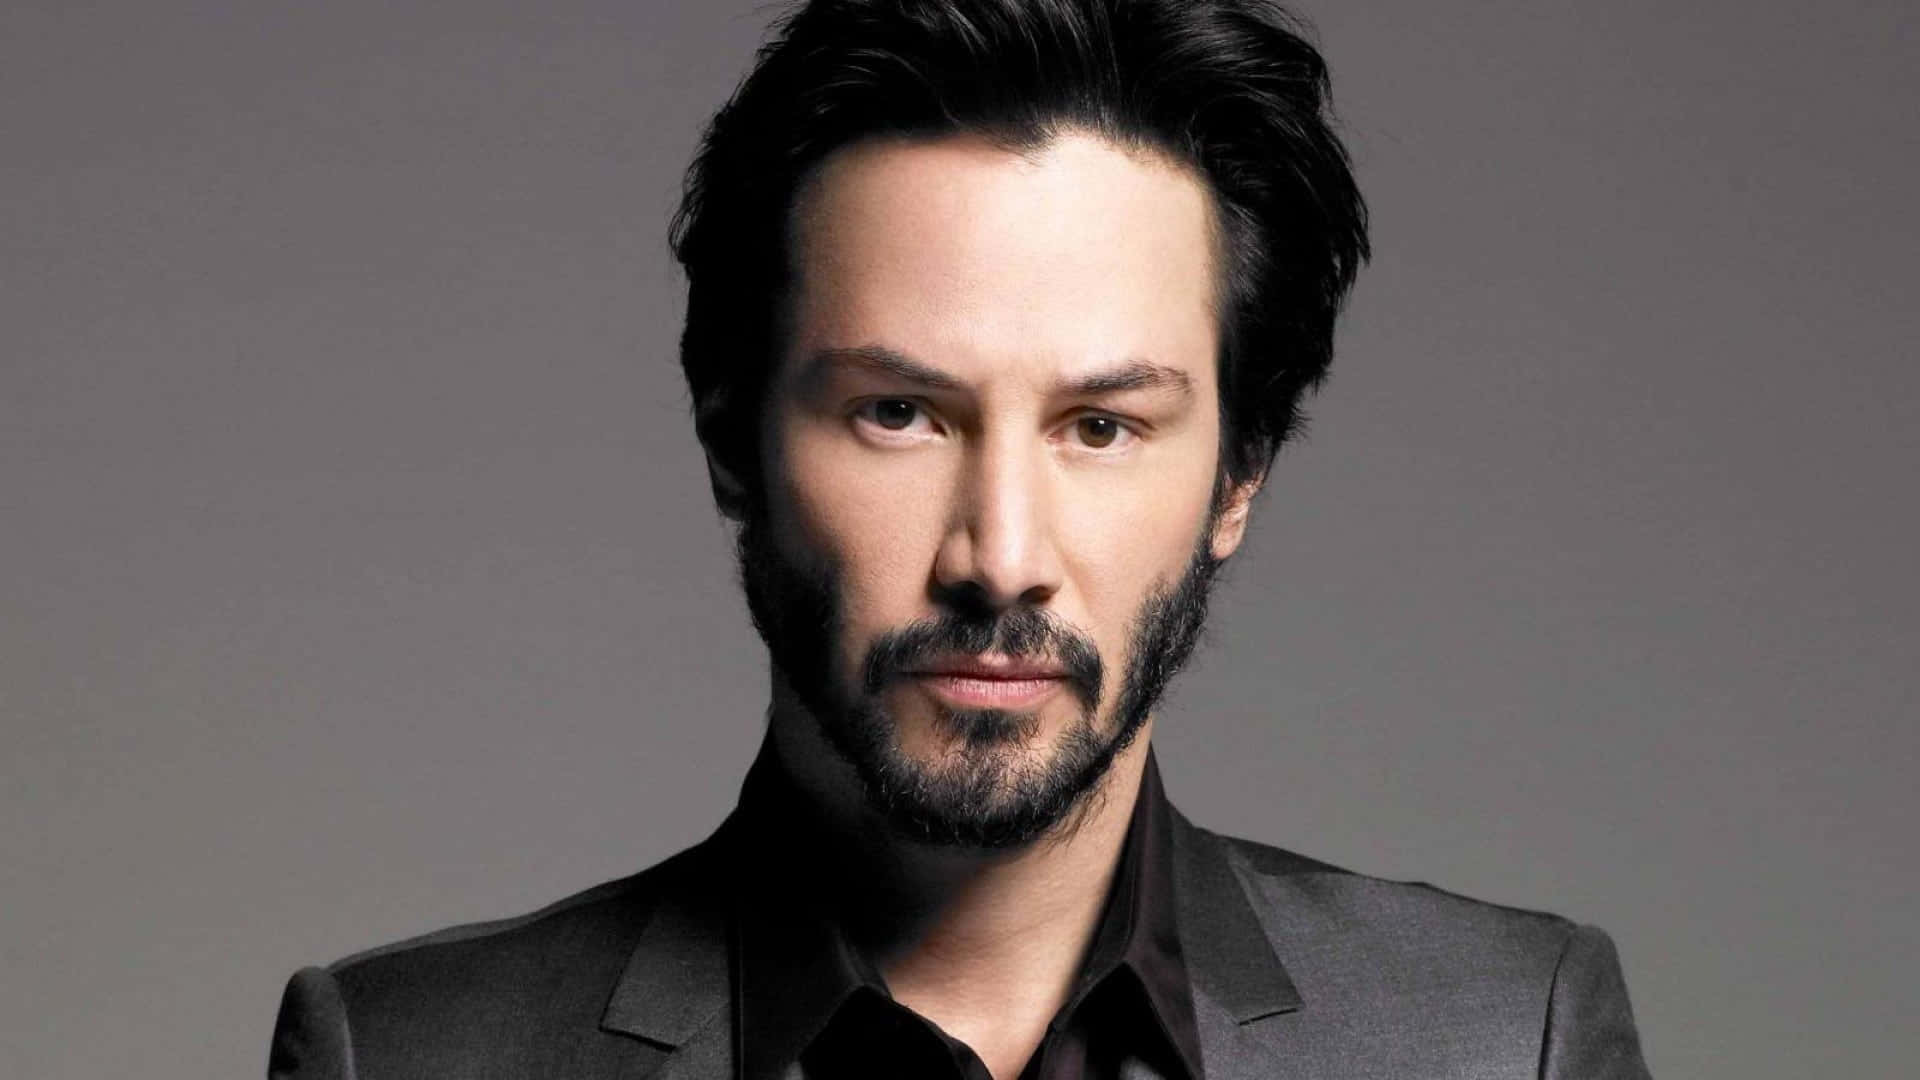 Keanu Reeves strikes a pose on the red carpet